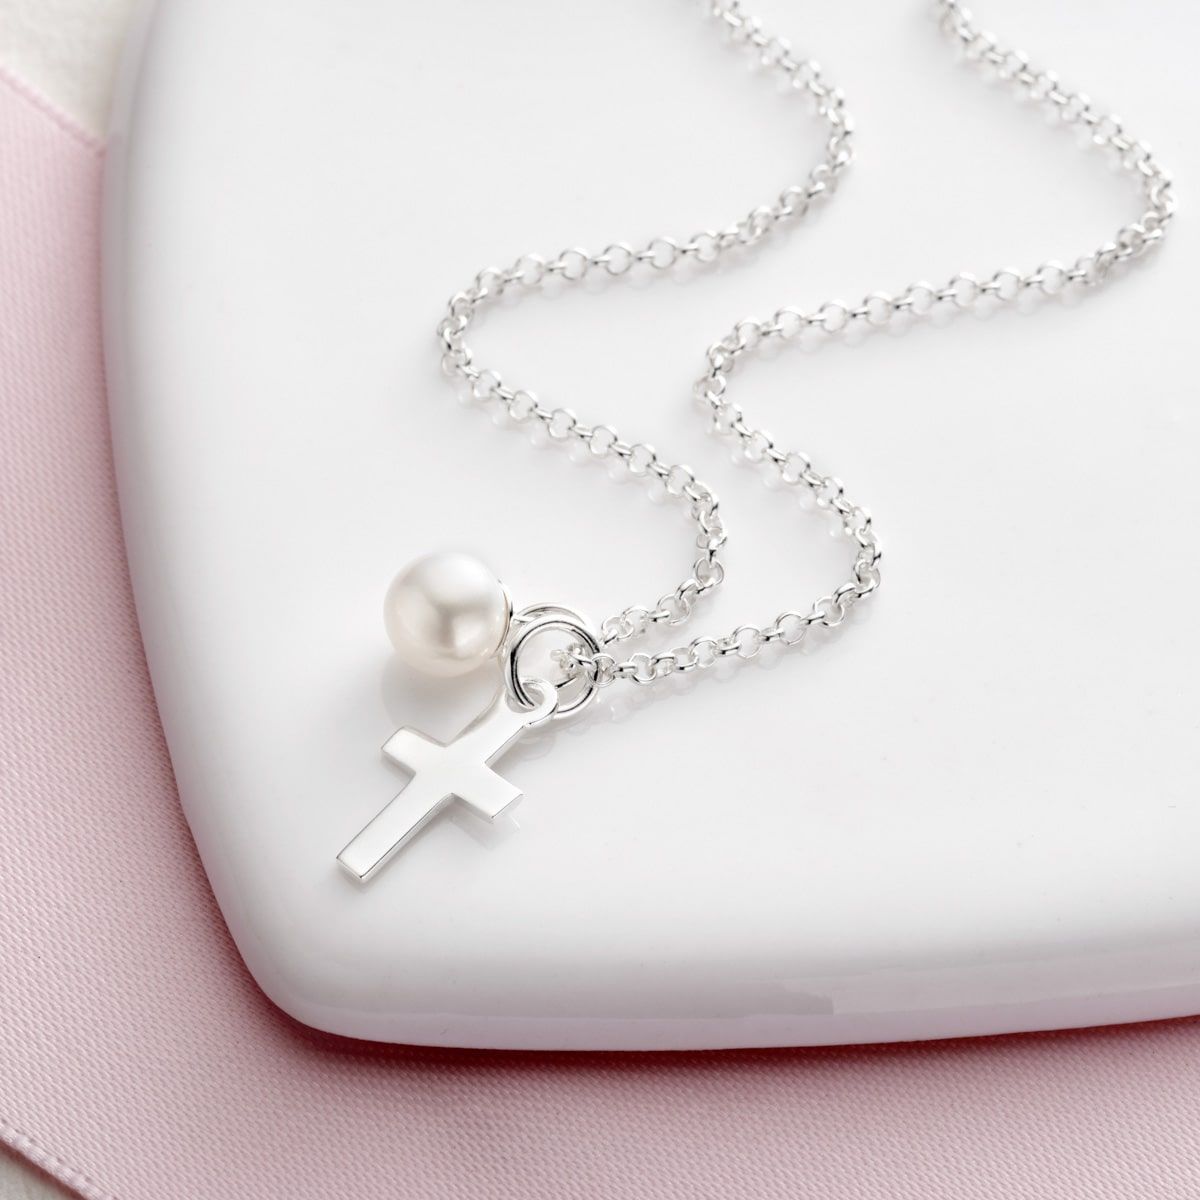 What Does a Cross Pendant Say About You? - Oliver Cabell